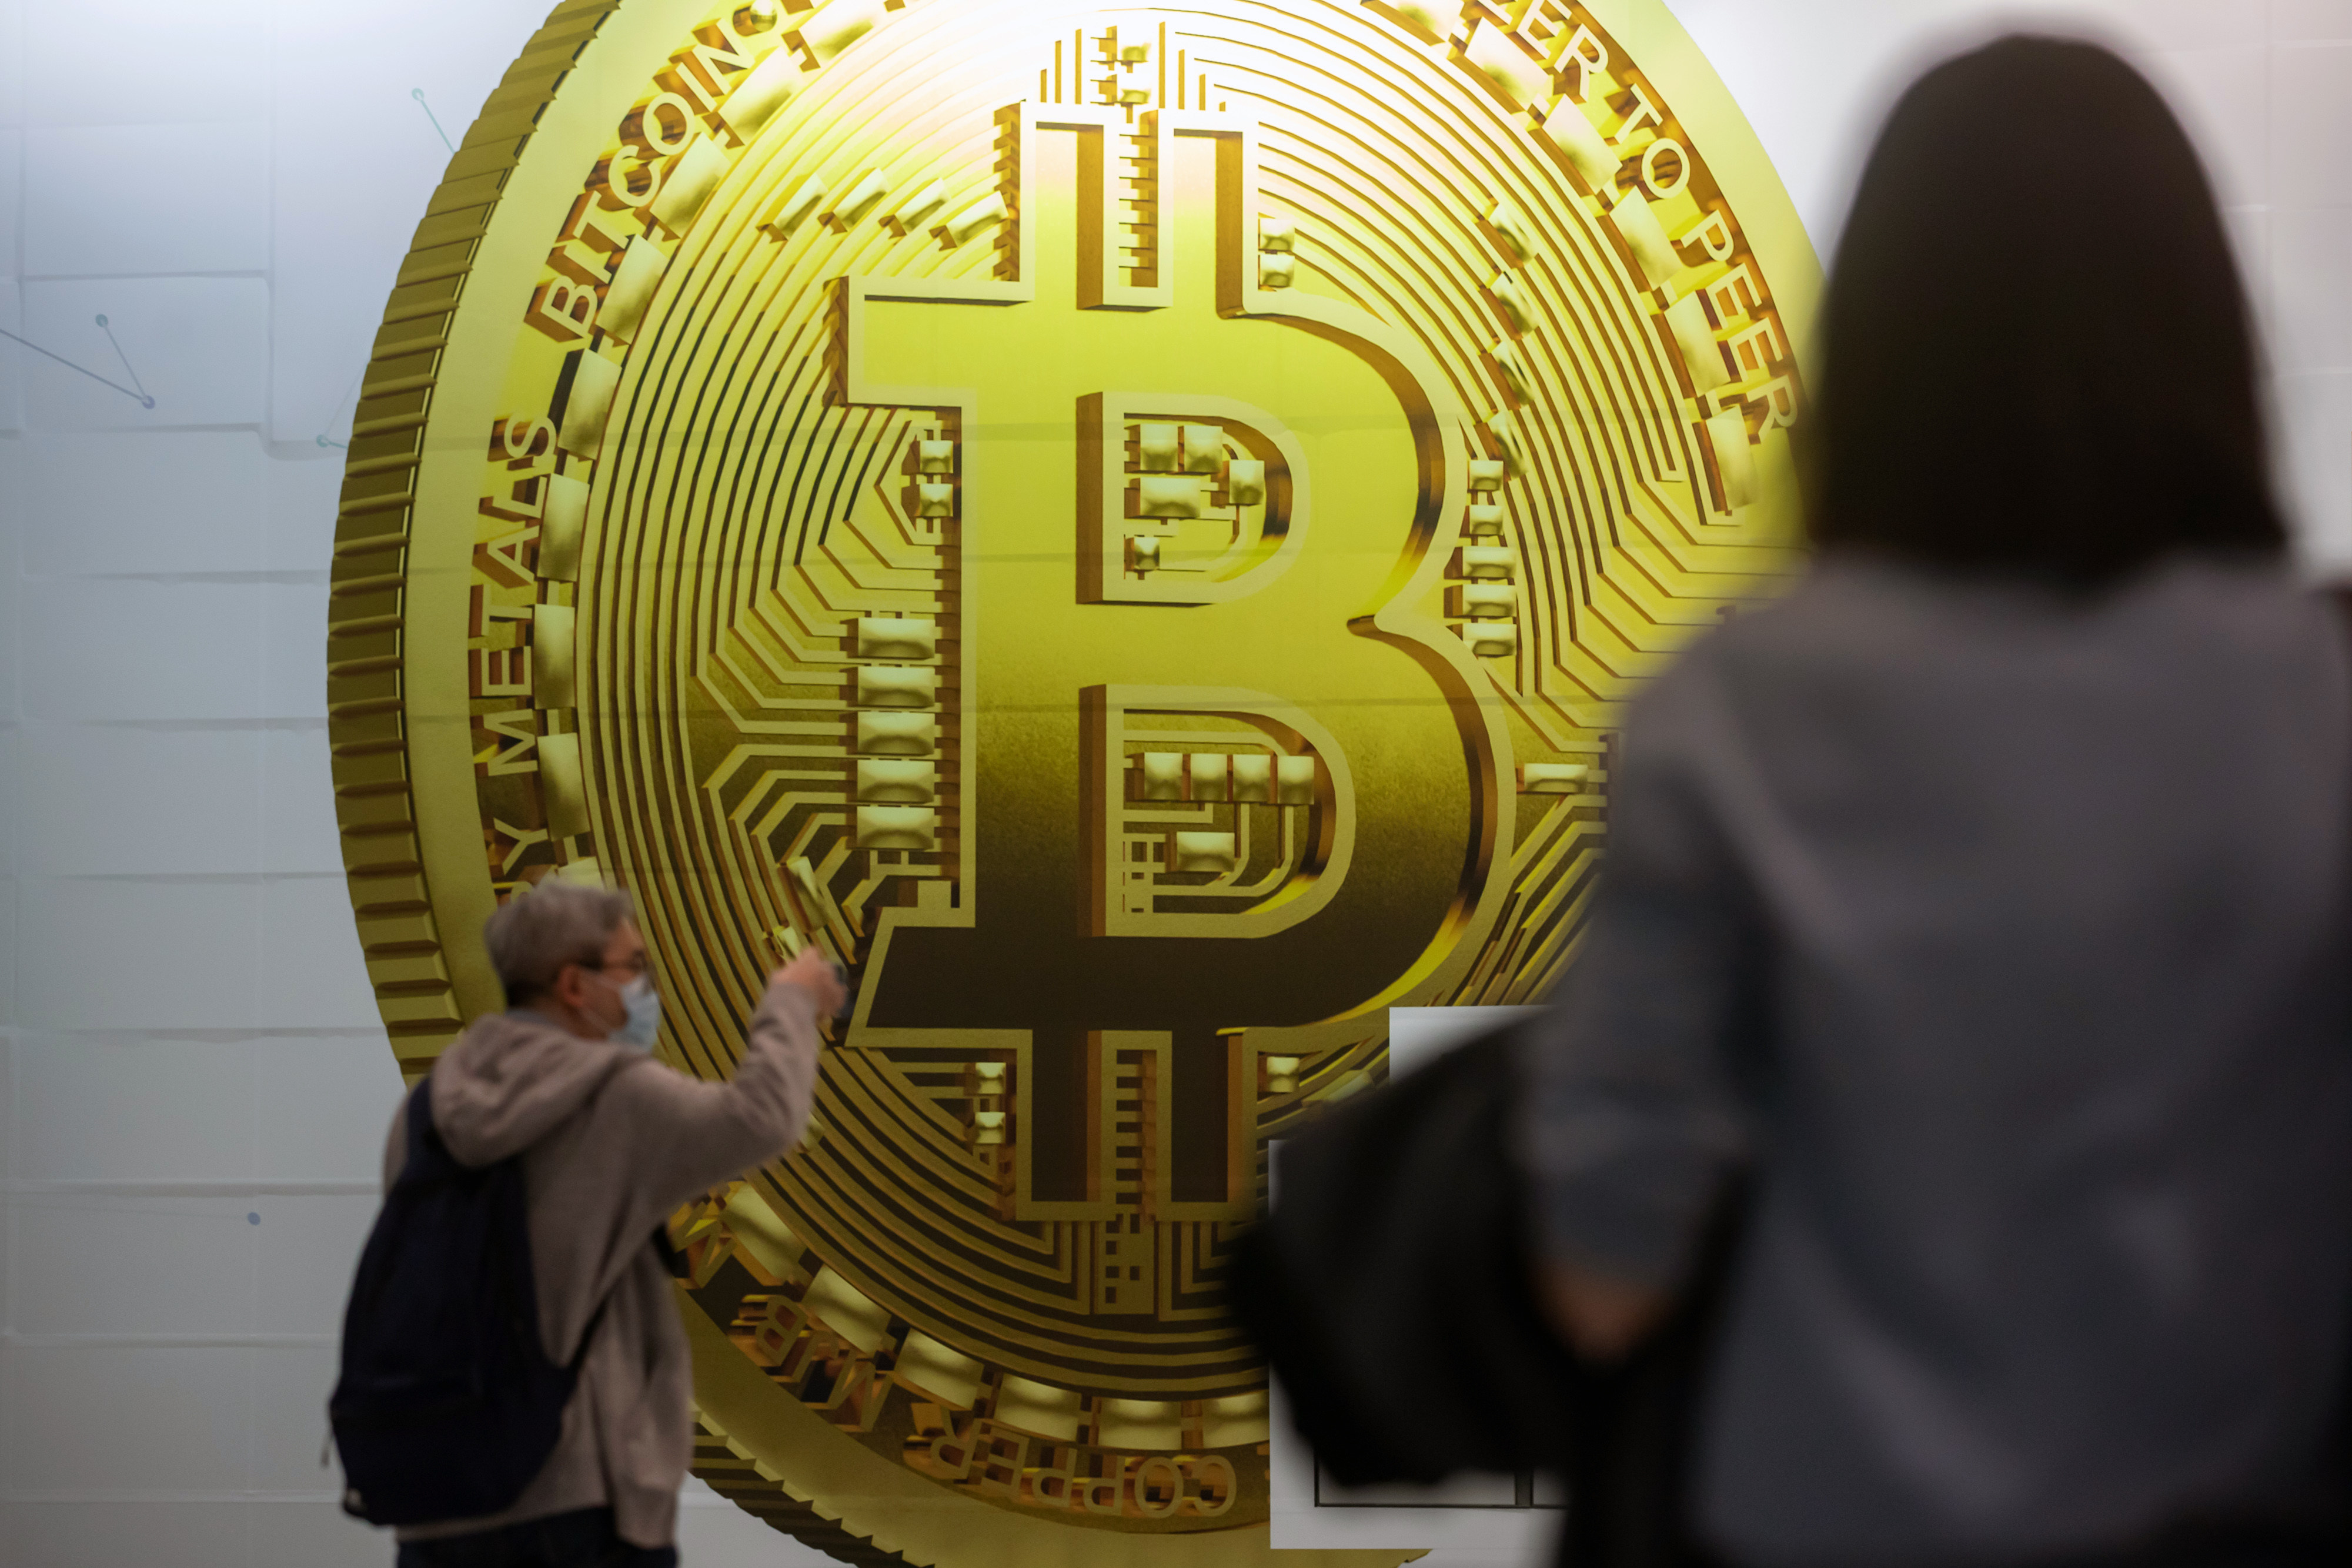 An advertisement displays a Bitcoin cryptocurrency token at a subway station in Hong Kong, China, on Thursday, Feb. 10, 2022. Photo: Bloomberg 